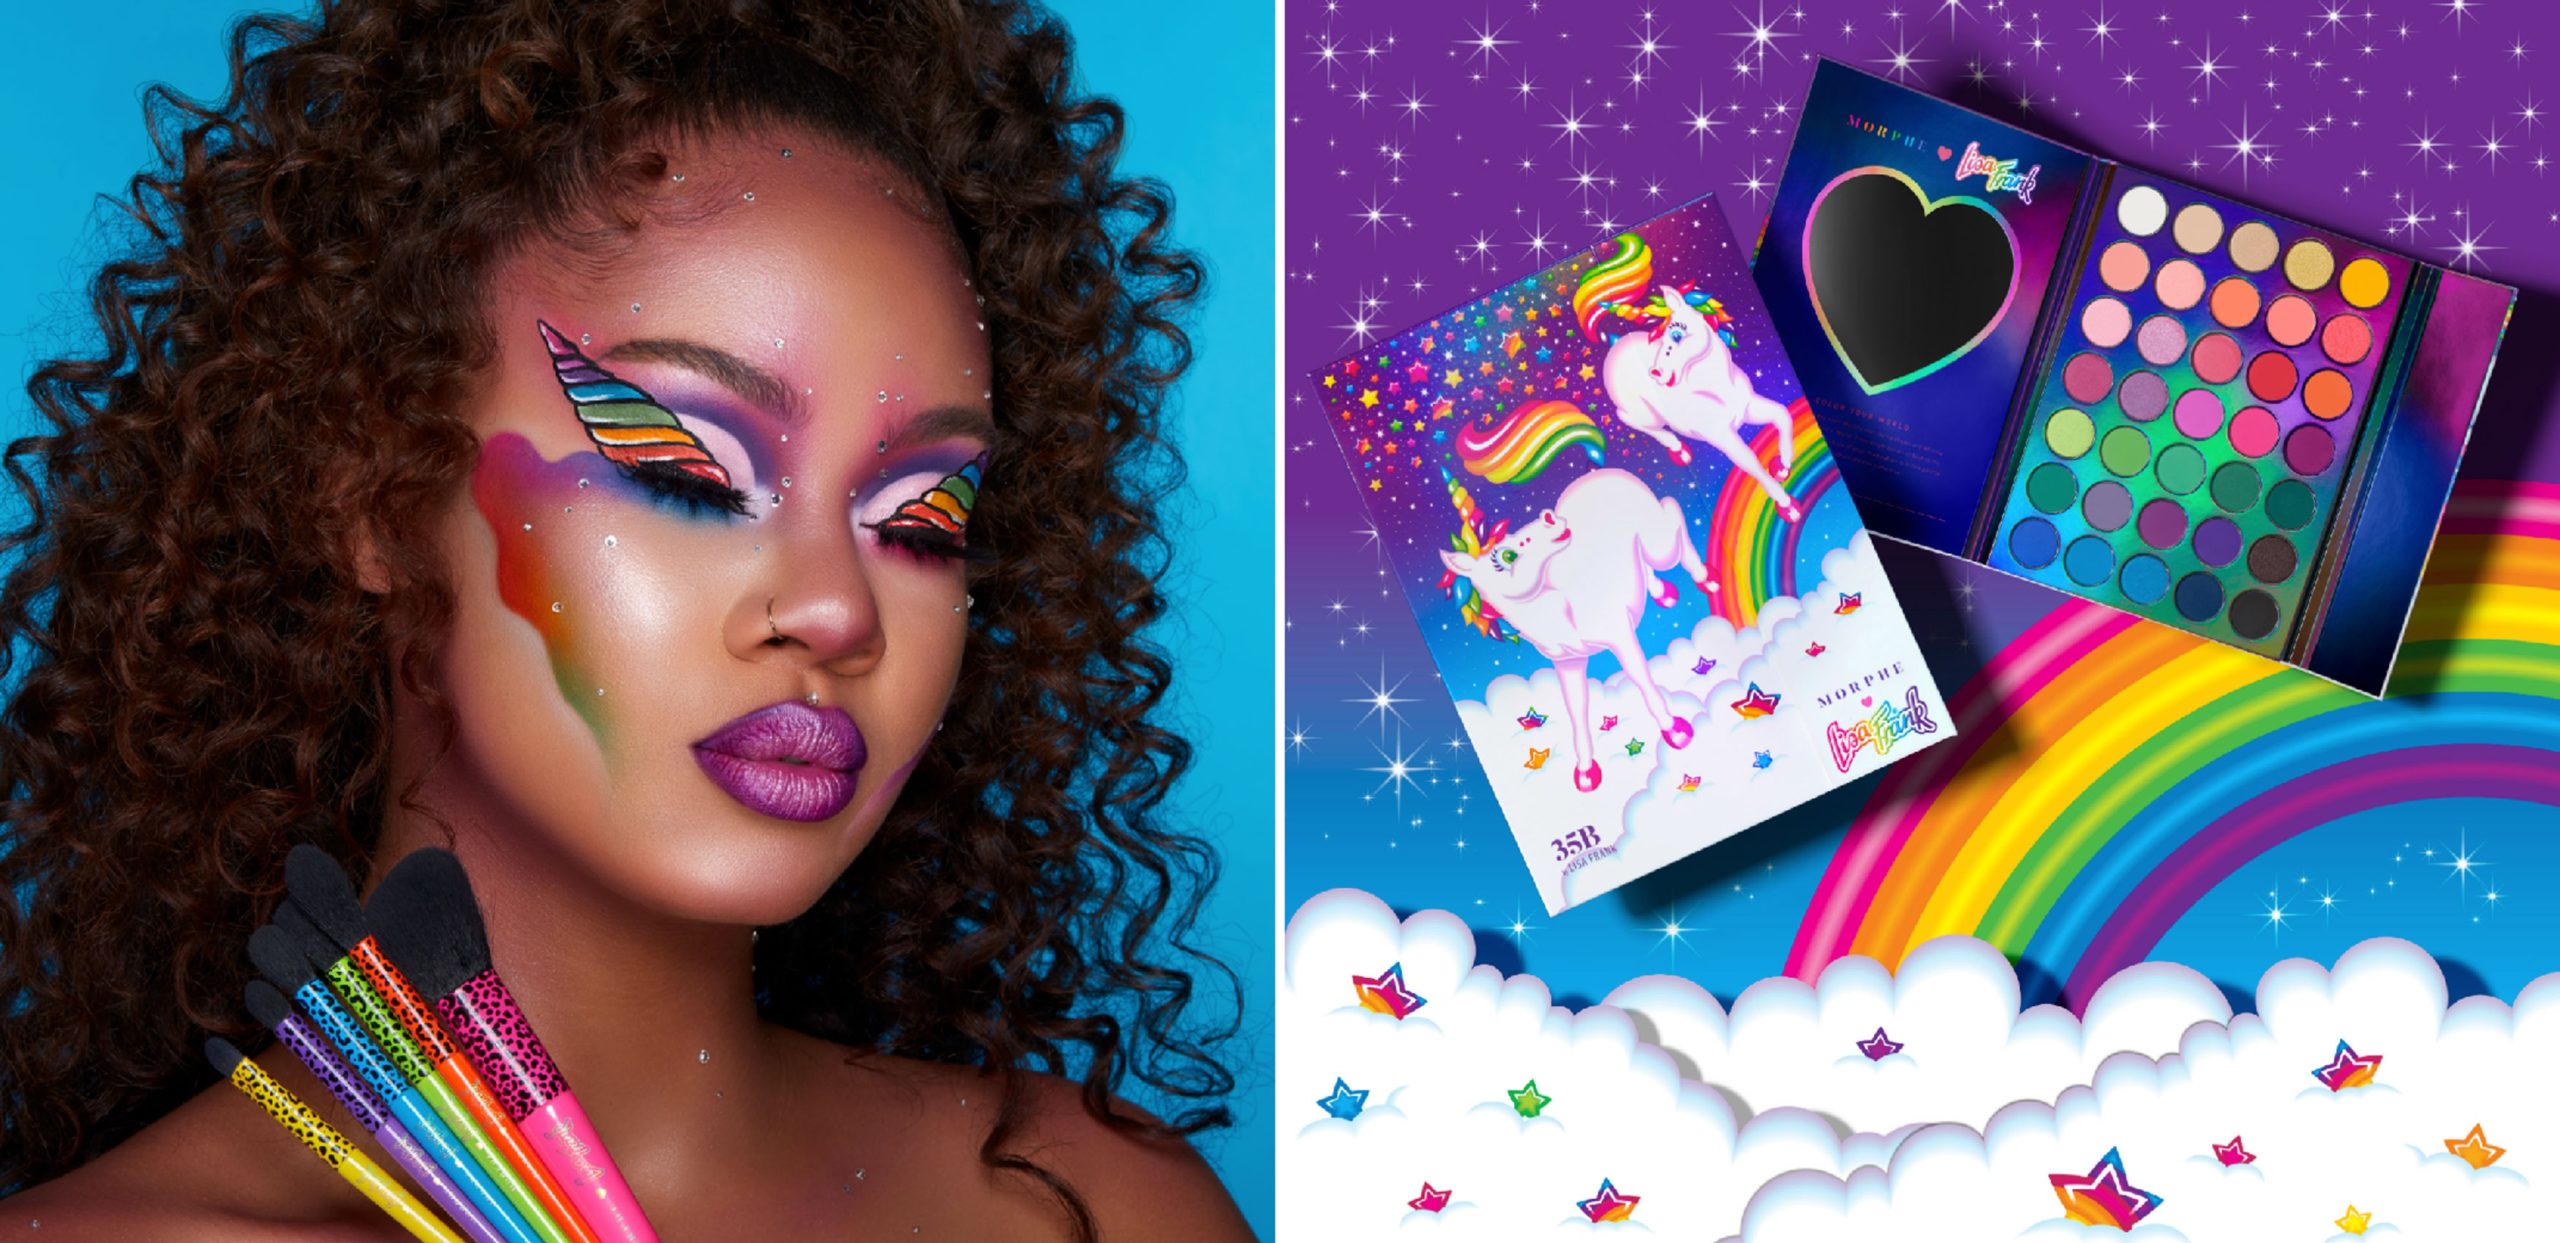 Morphe's Lisa Frank Makeup Collection Is Being Restocked With New Products